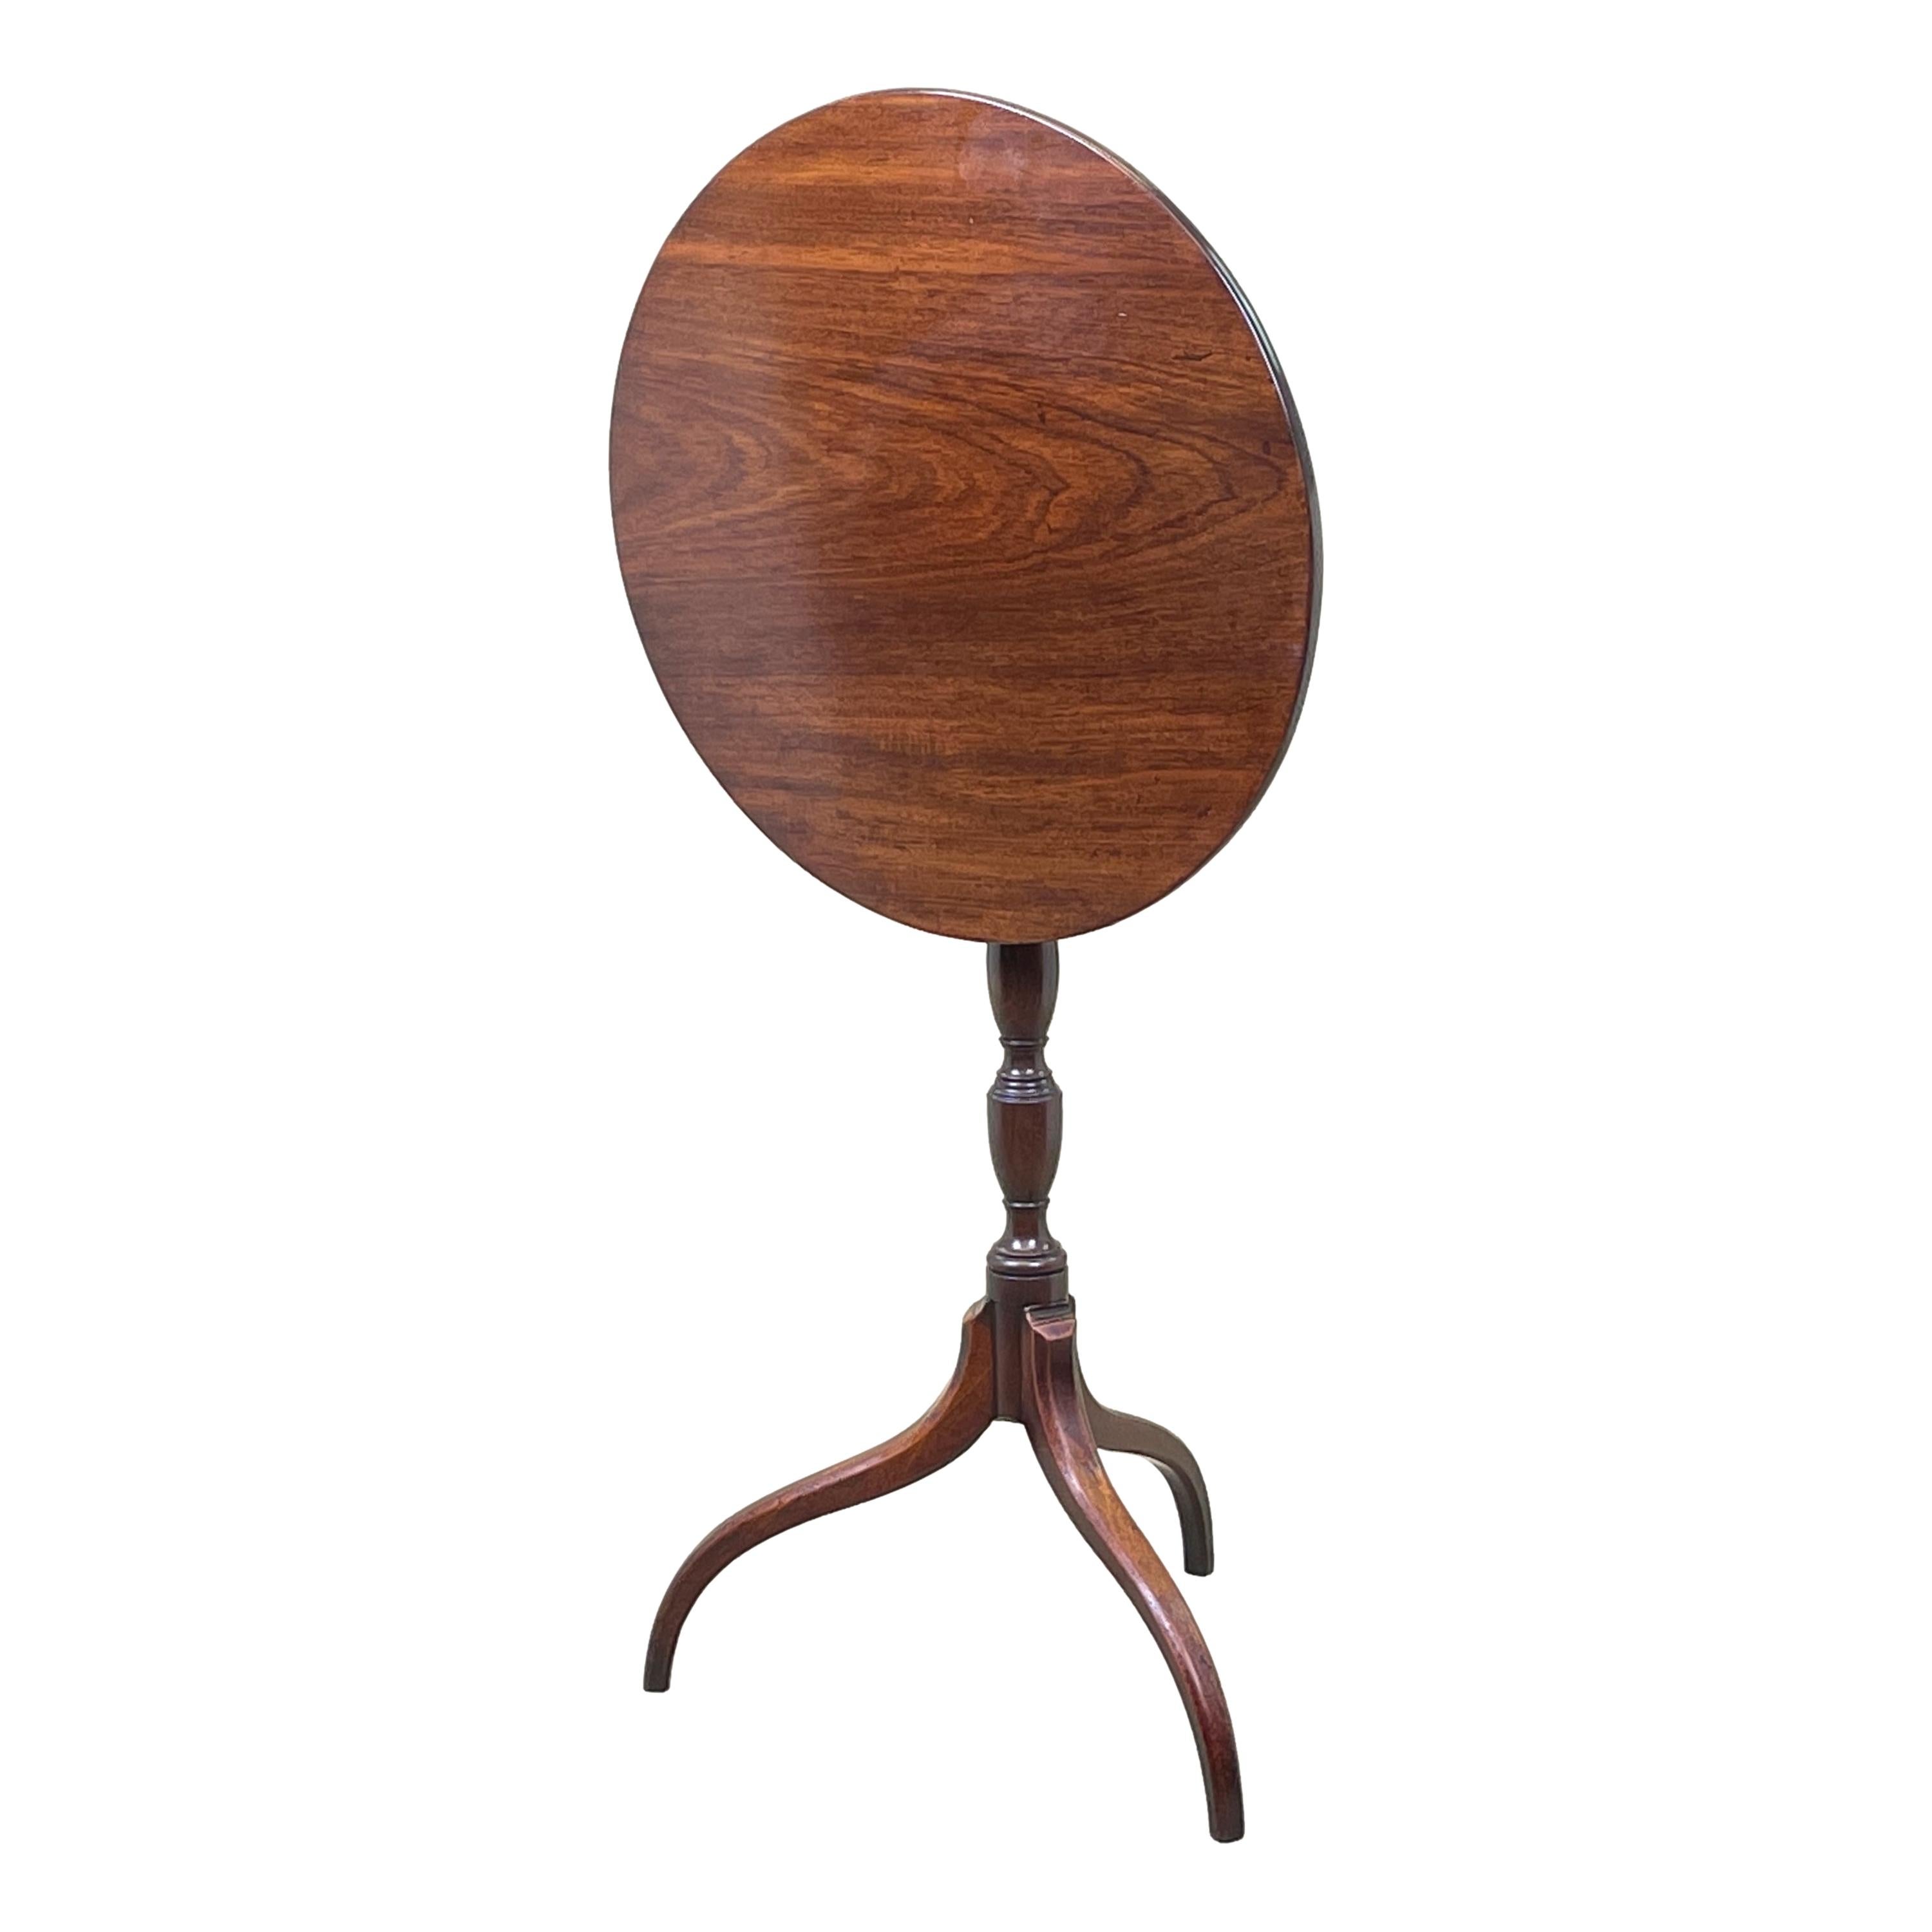 A Very Good Quality Regency Period, mahogany wine table, Or Occasional Lamp Table, Having Superbly Figured Circular Tilting Top Over Elegant Turned Central Column Terminating On Umbrella Tripod Legs.


This simple, but beuatiful little lamp table